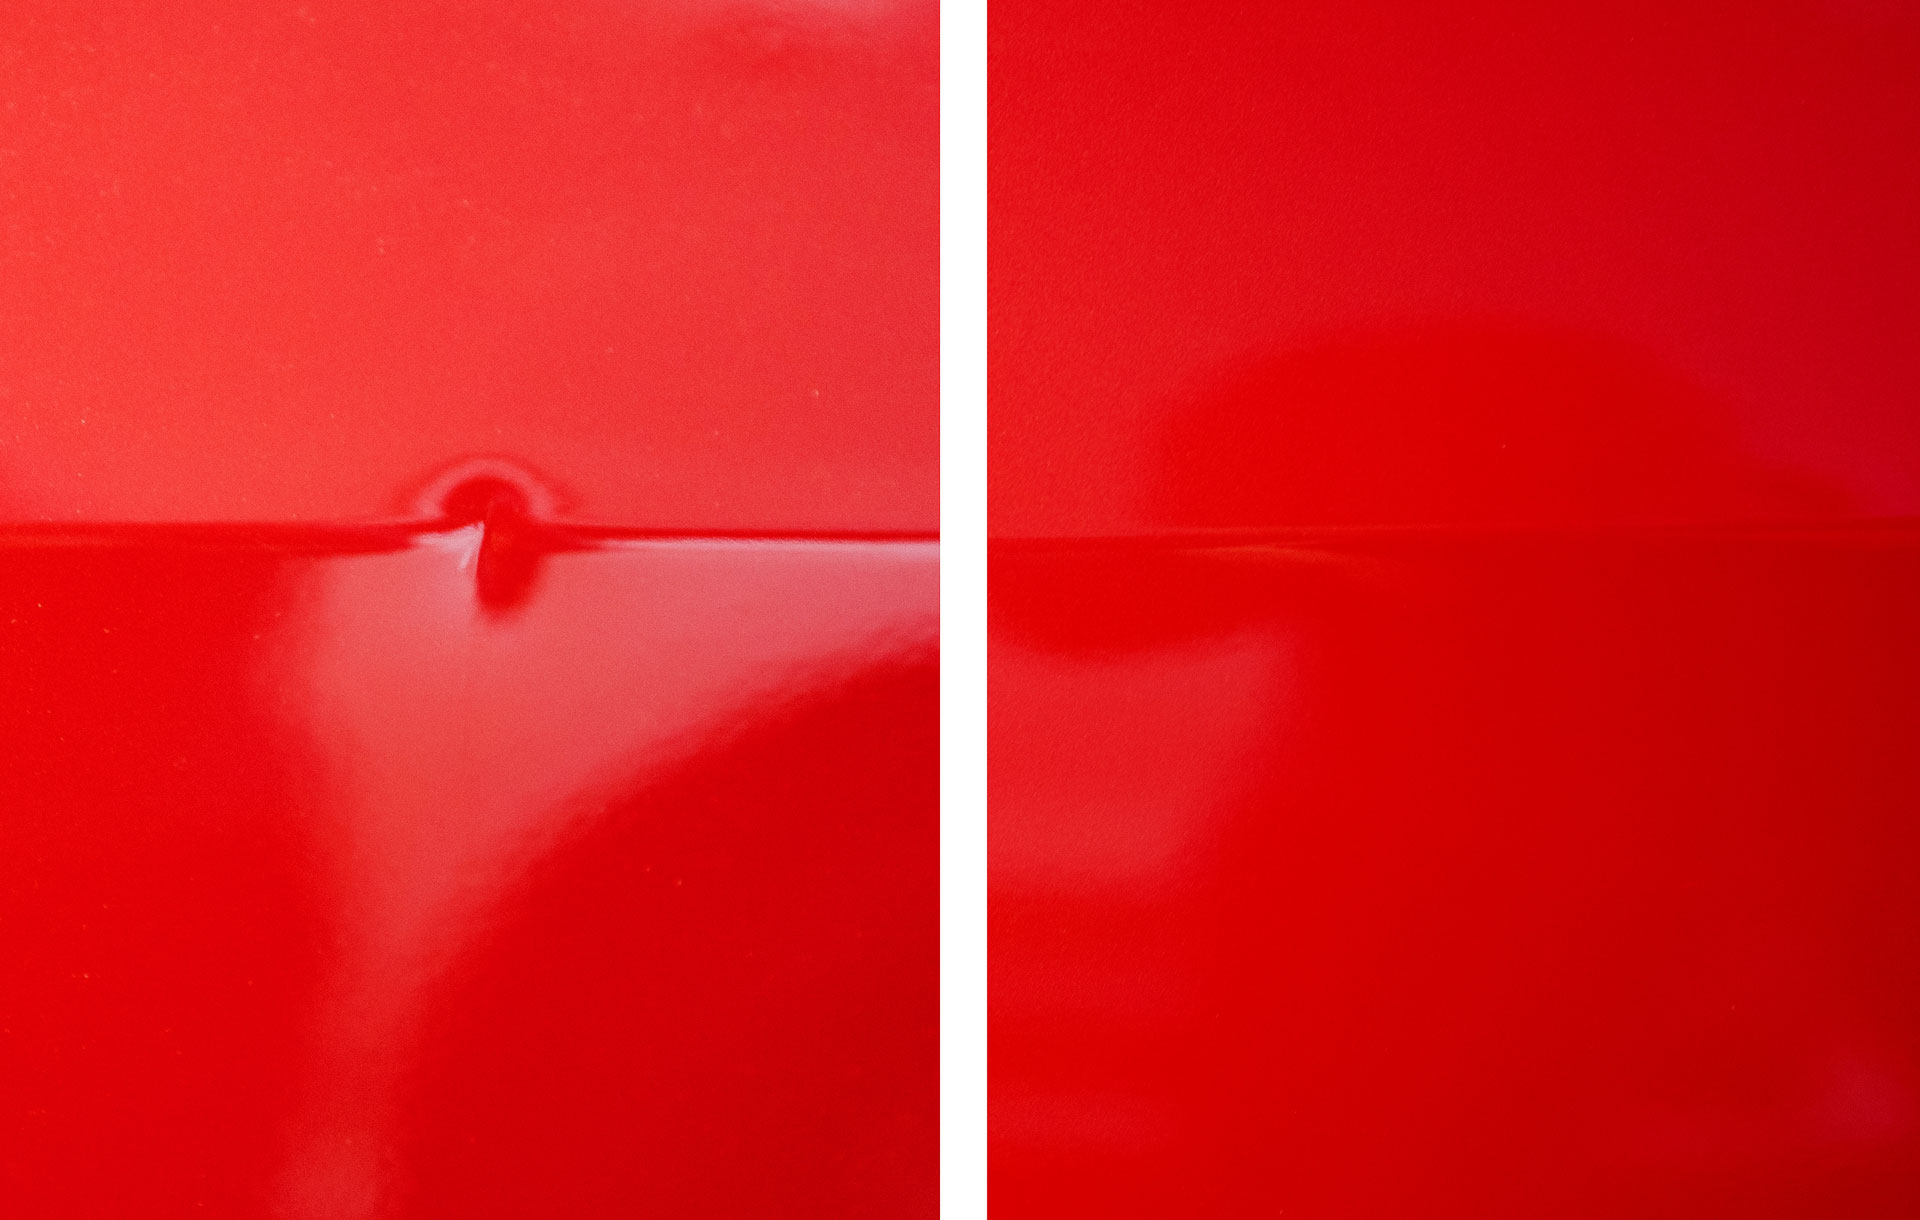 How to Identify Common Types of Vehicle Dents and Their Solutions with Paintless Dent Removal